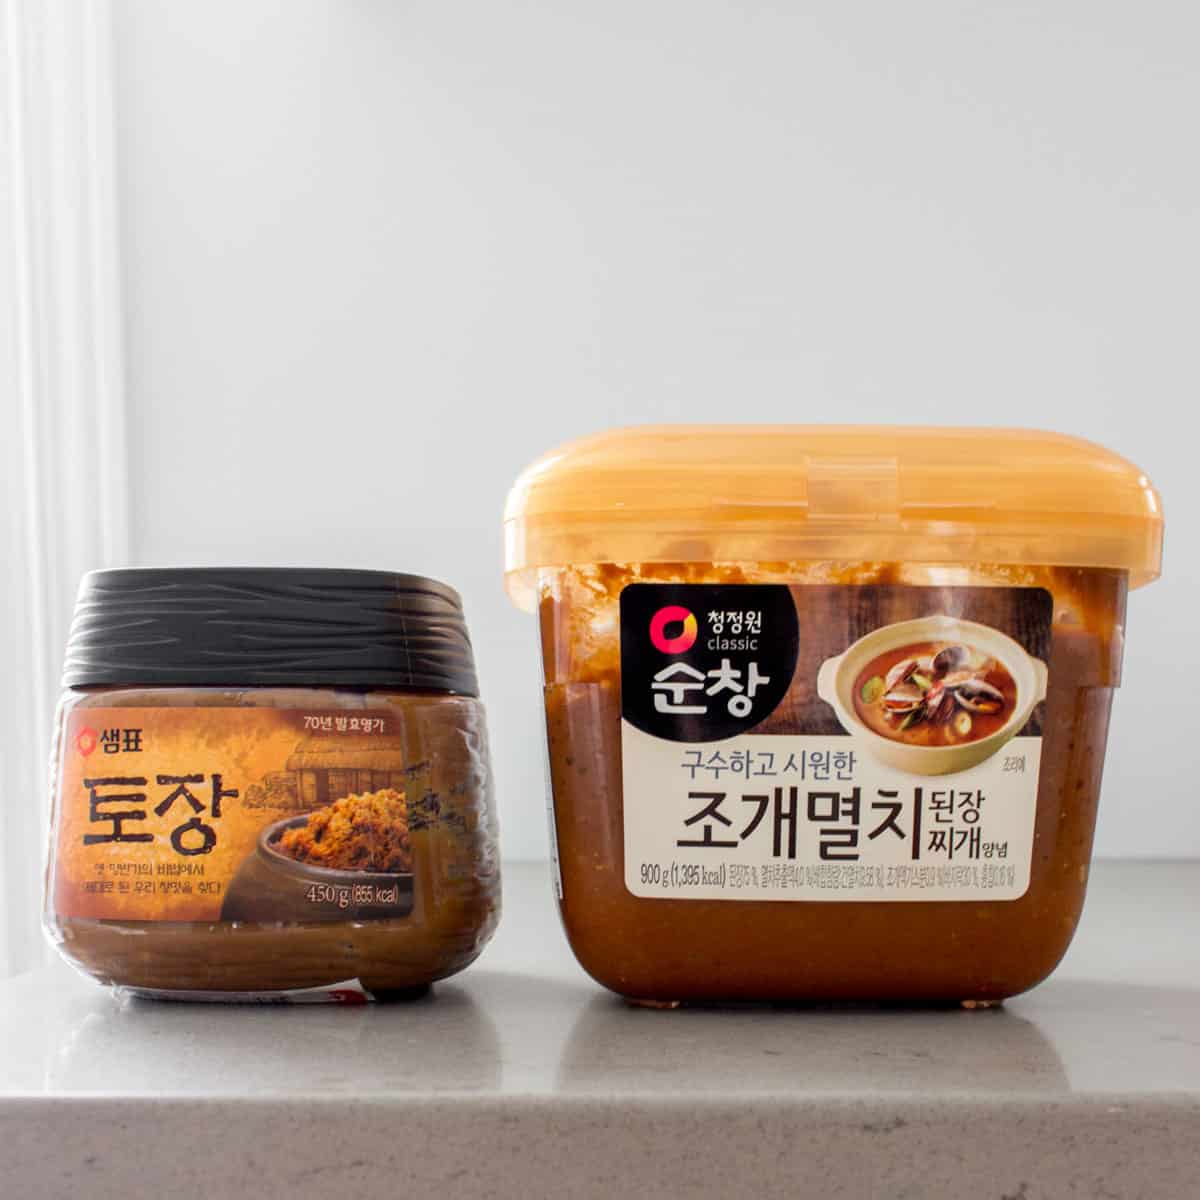 Two types of soybean paste.